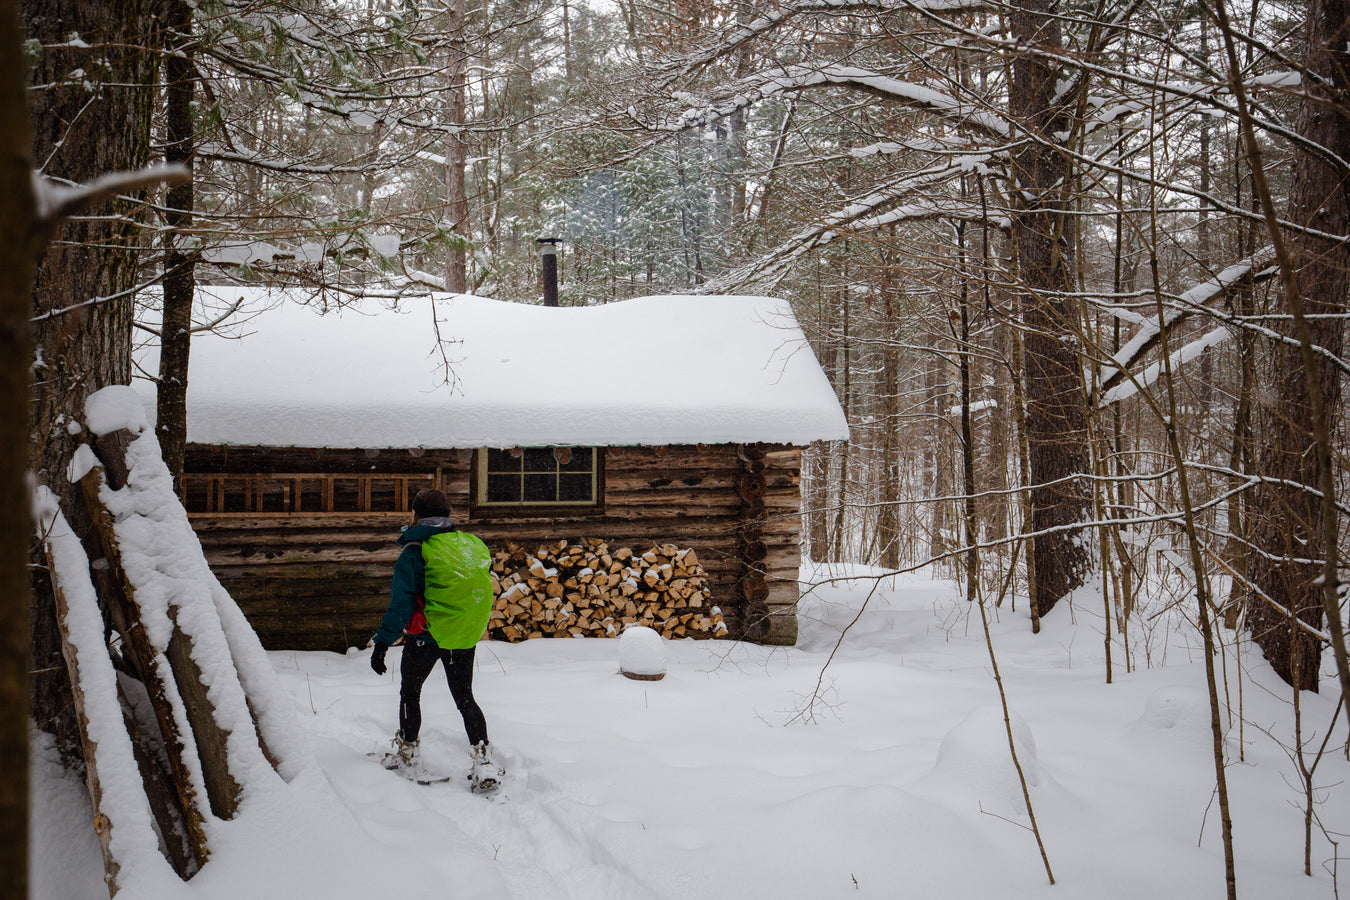 Central Ontario Best selection for cross-country skiing and snowshoes